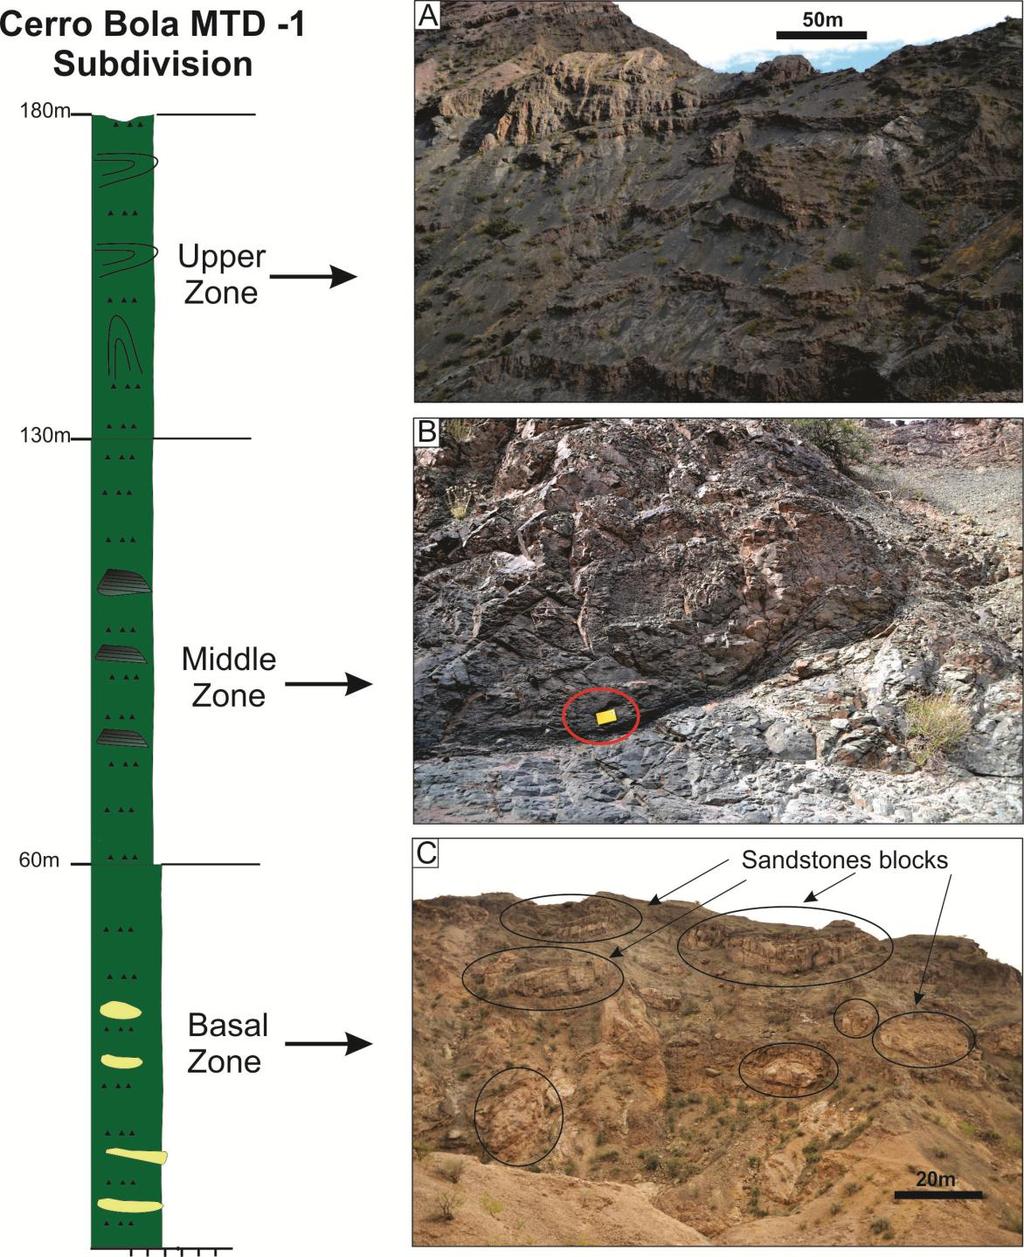 55 Figure 4 Internal subdivision of MTD-1 from Cerro Bola, Argentina. A) Upper zone marked by intense folding and deformation. B) Deformed rhythmite block in the middle zone.